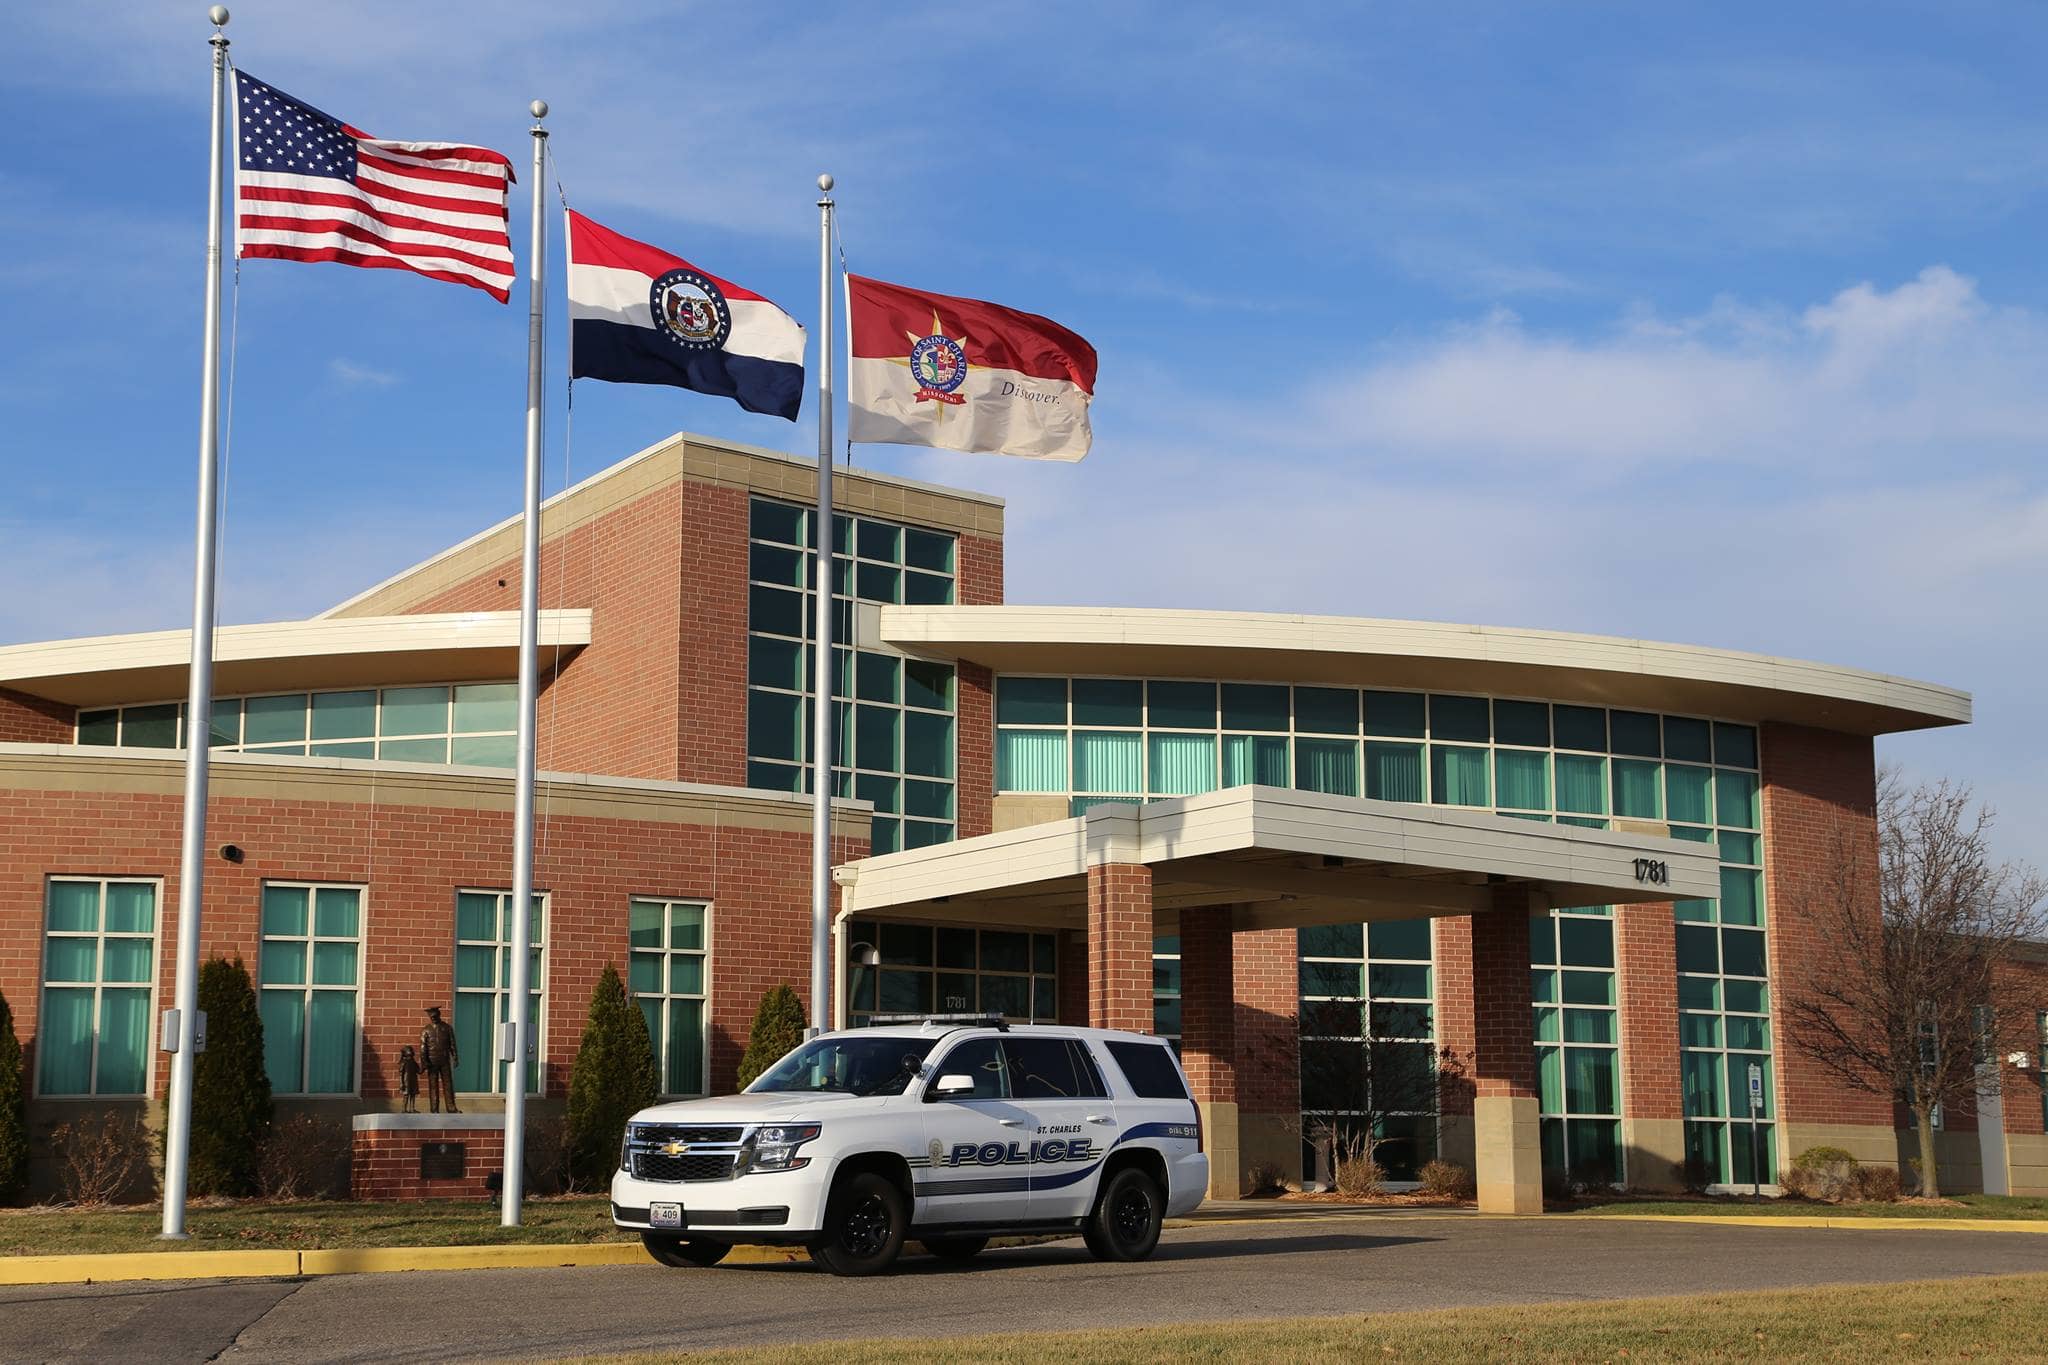 Image of City of St. Charles Police Department